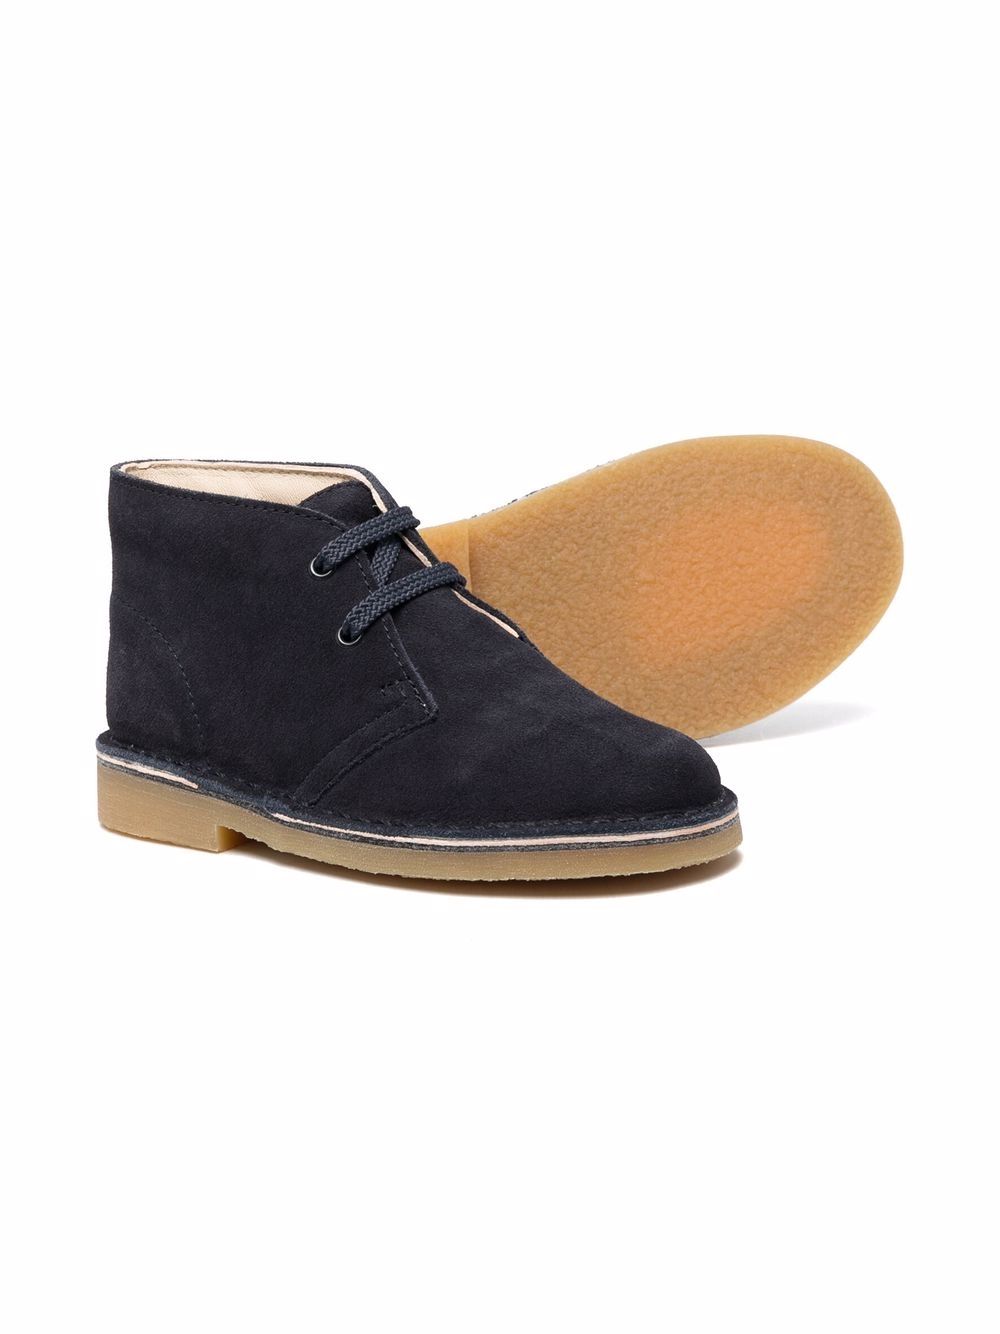 Shop Clarks Originals suede-leather desert boots with Express Delivery ...